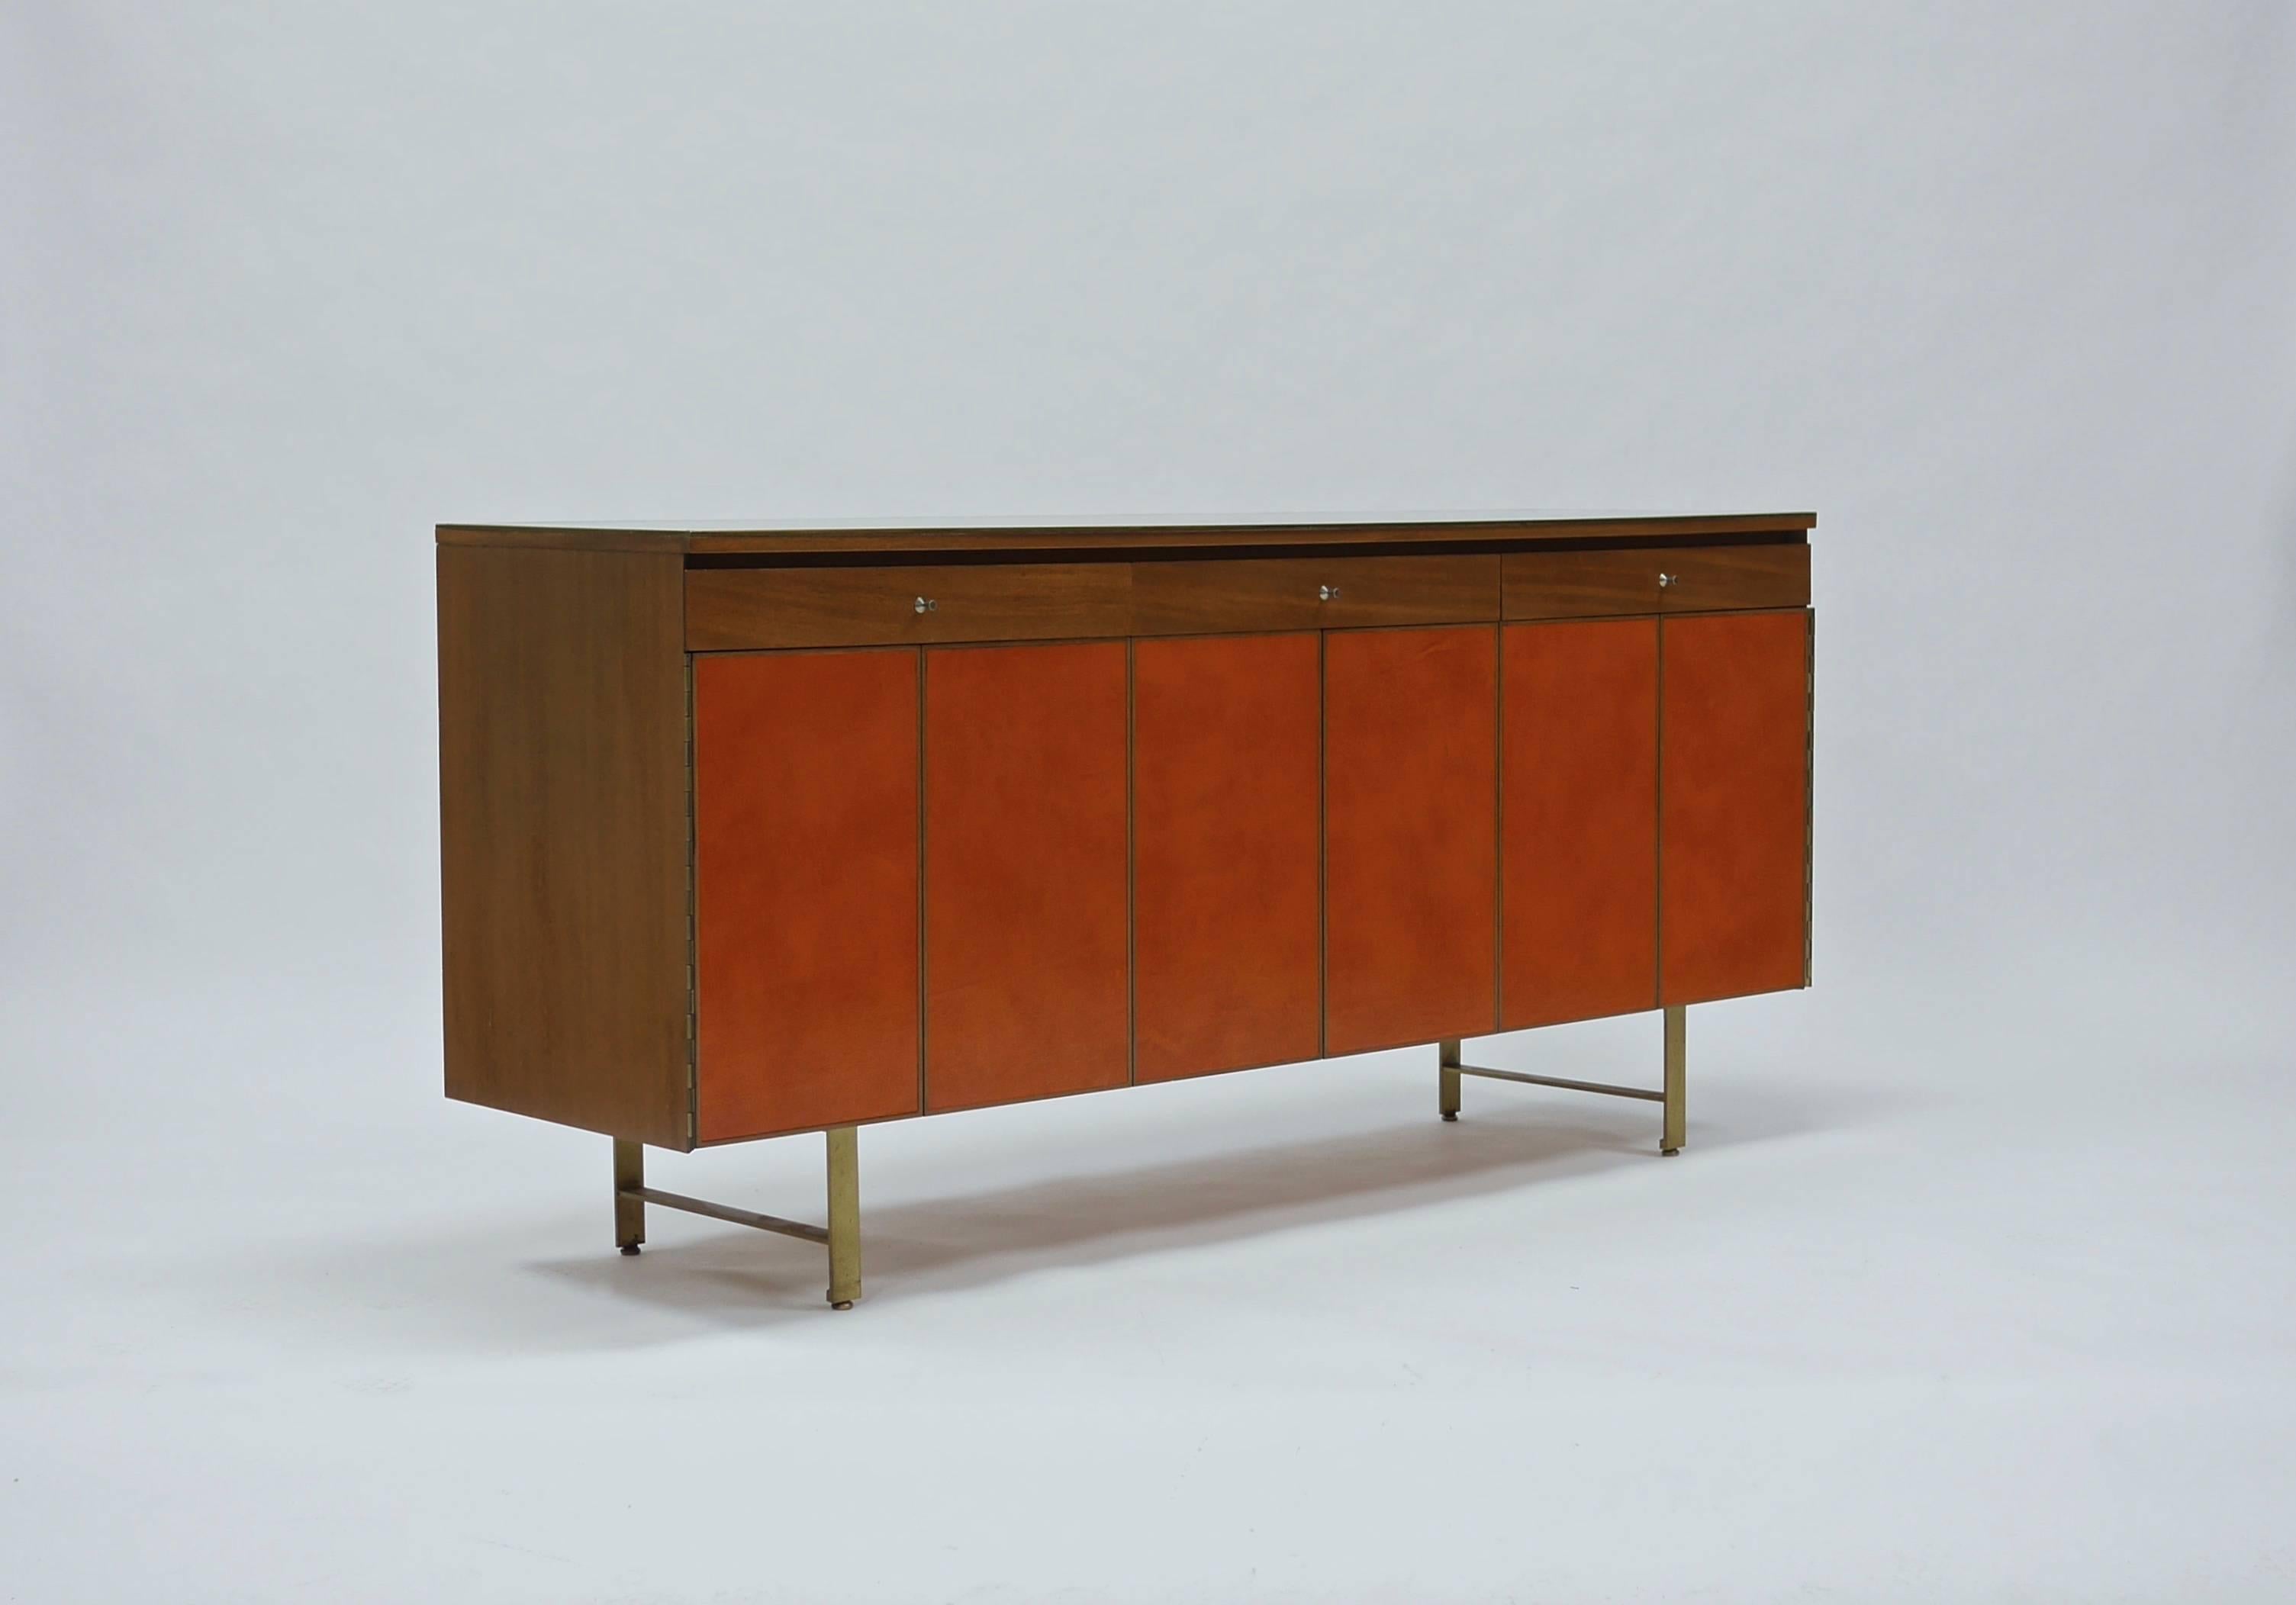 Rare and likely unique, Paul McCobb for Calvin Group walnut and leather front credenza with flat bar brass legs. Accordion trifold doors open to reveal adjustable shelving on the left and right. Upper drawers are leather lined . Excellent, original,